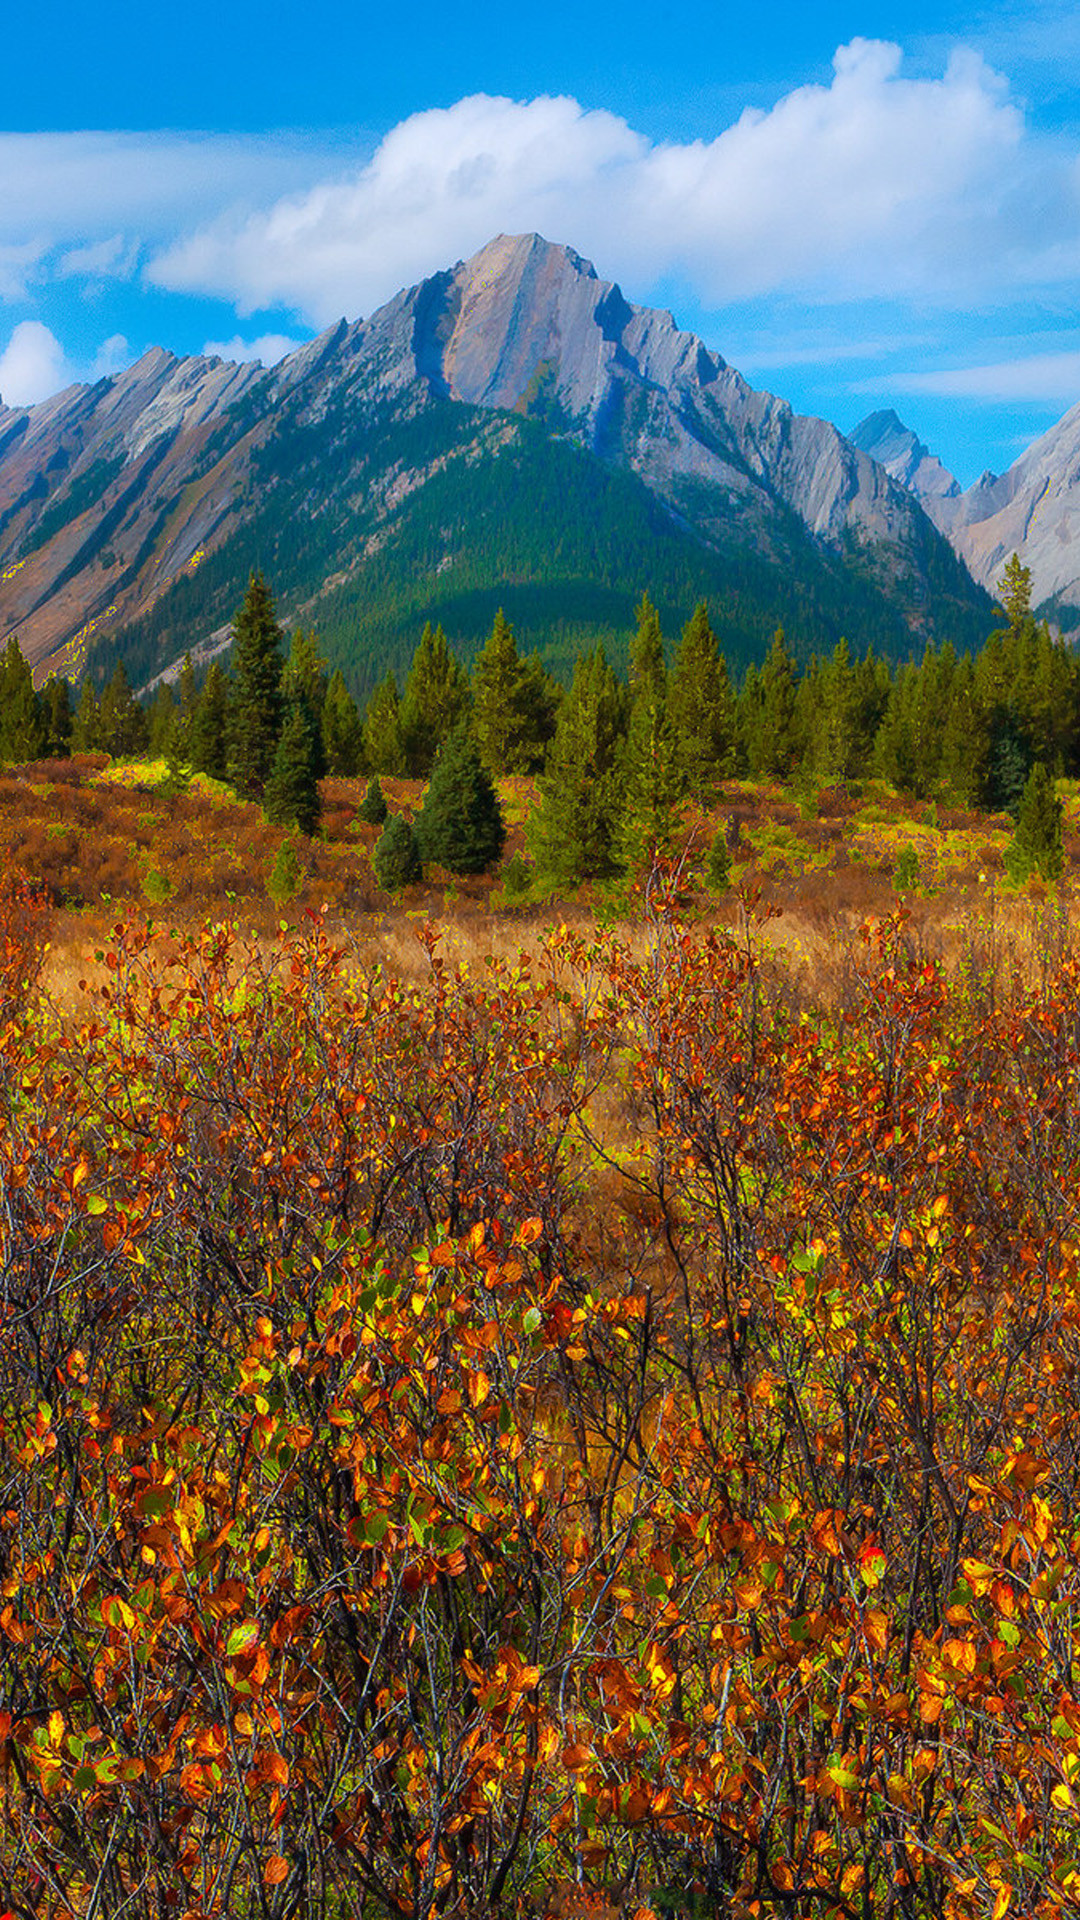 Wallpaper Weekends Fall has Dell – Autumn Wallpapers for the iPhone